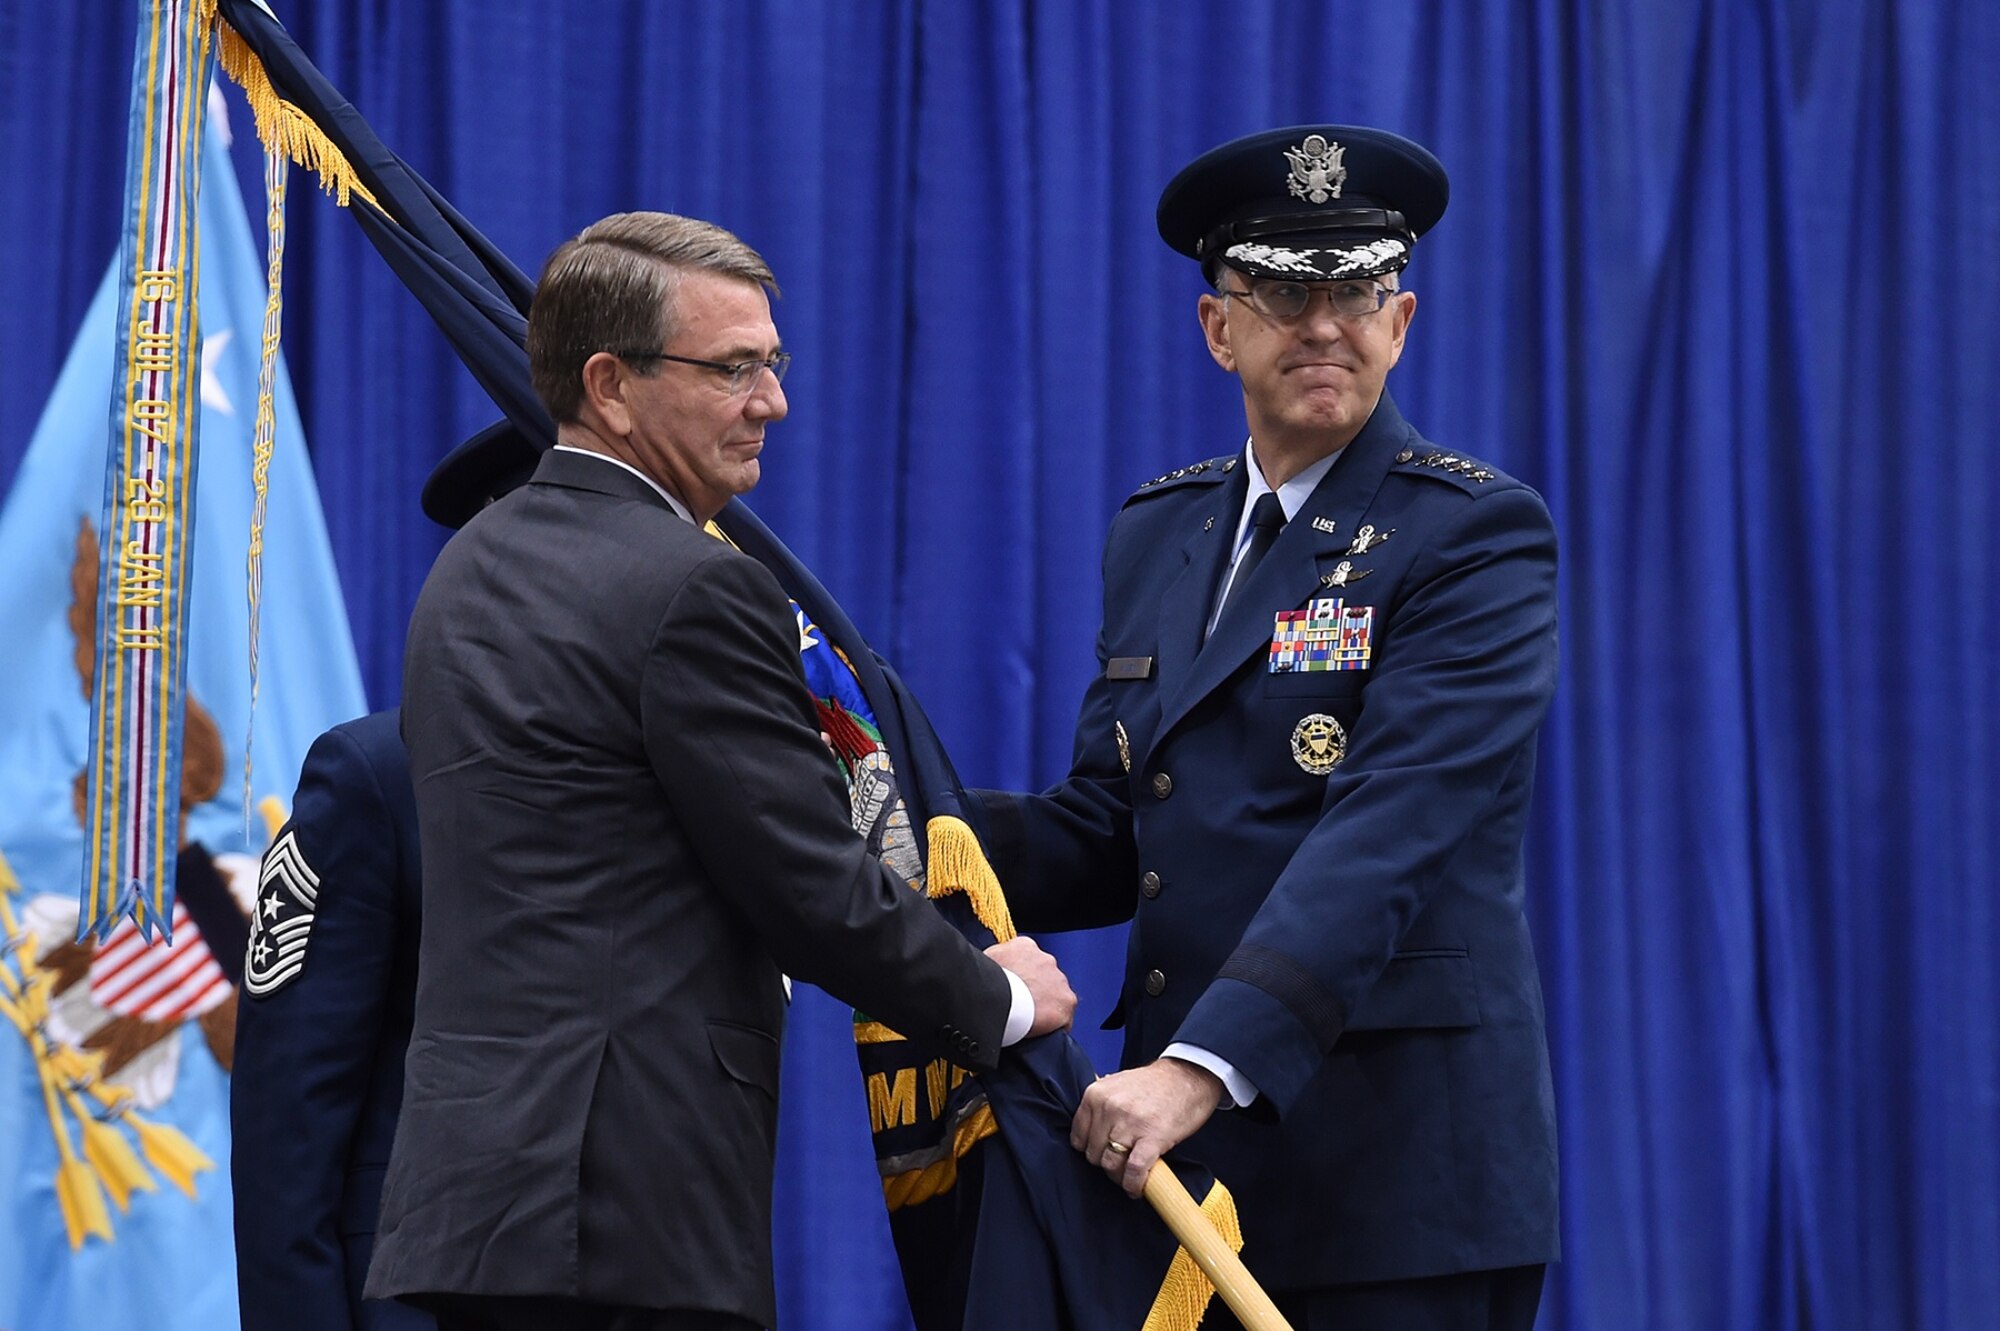 Gen. John E. Hyten (right), accepts the command guidon from Secretary of Defense Ash Carter as he assumes command of U.S. Strategic Command (USSTRATCOM) during a change of command ceremony at Offutt Air Force Base, Neb., Nov. 3, 2016. Carter presided over the change of command and provided remarks during which he congratulated Hyten on his appointment as the new USSTRATCOM commander. He also thanked Adm. Cecil D. Haney, outgoing USSTRATCOM commander, for his service. Additionally, Chairman of the Joint Chiefs of Staff Gen. Joseph F. Dunford provided remarks during the ceremony and presented the Joint Meritorious Unit Award to USSTRATCOM. Hyten previously served as commander of Air Force Space Command, and Haney will retire from active military duty during a separate ceremony in January. One of nine DoD unified combatant commands, USSTRATCOM has global strategic missions assigned through the Unified Command Plan that include strategic deterrence; space operations; cyberspace operations; joint electronic warfare; global strike; missile defense; intelligence, surveillance and reconnaissance; combating weapons of mass destruction; and analysis and targeting. (U.S. Air Force photo by Staff Sgt. Jonathan Lovelady)